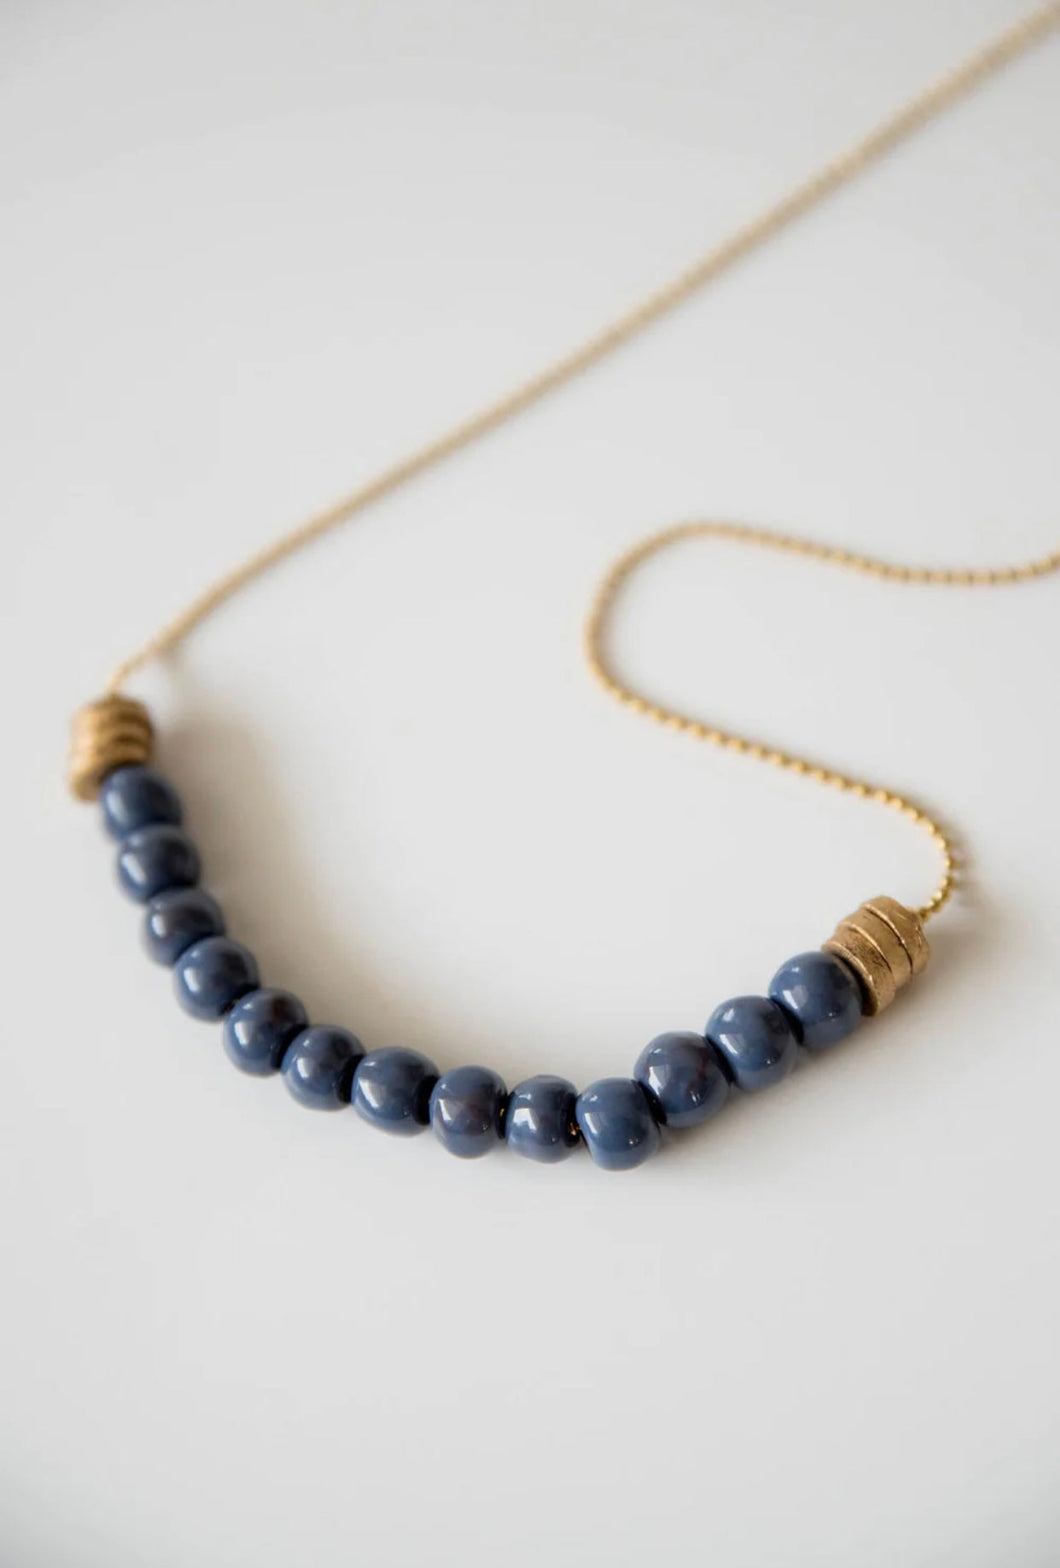 Bel Koz Single Strand Flat Bead Necklace - FRENCH NAVY - Link in description to purchase at Betsey's